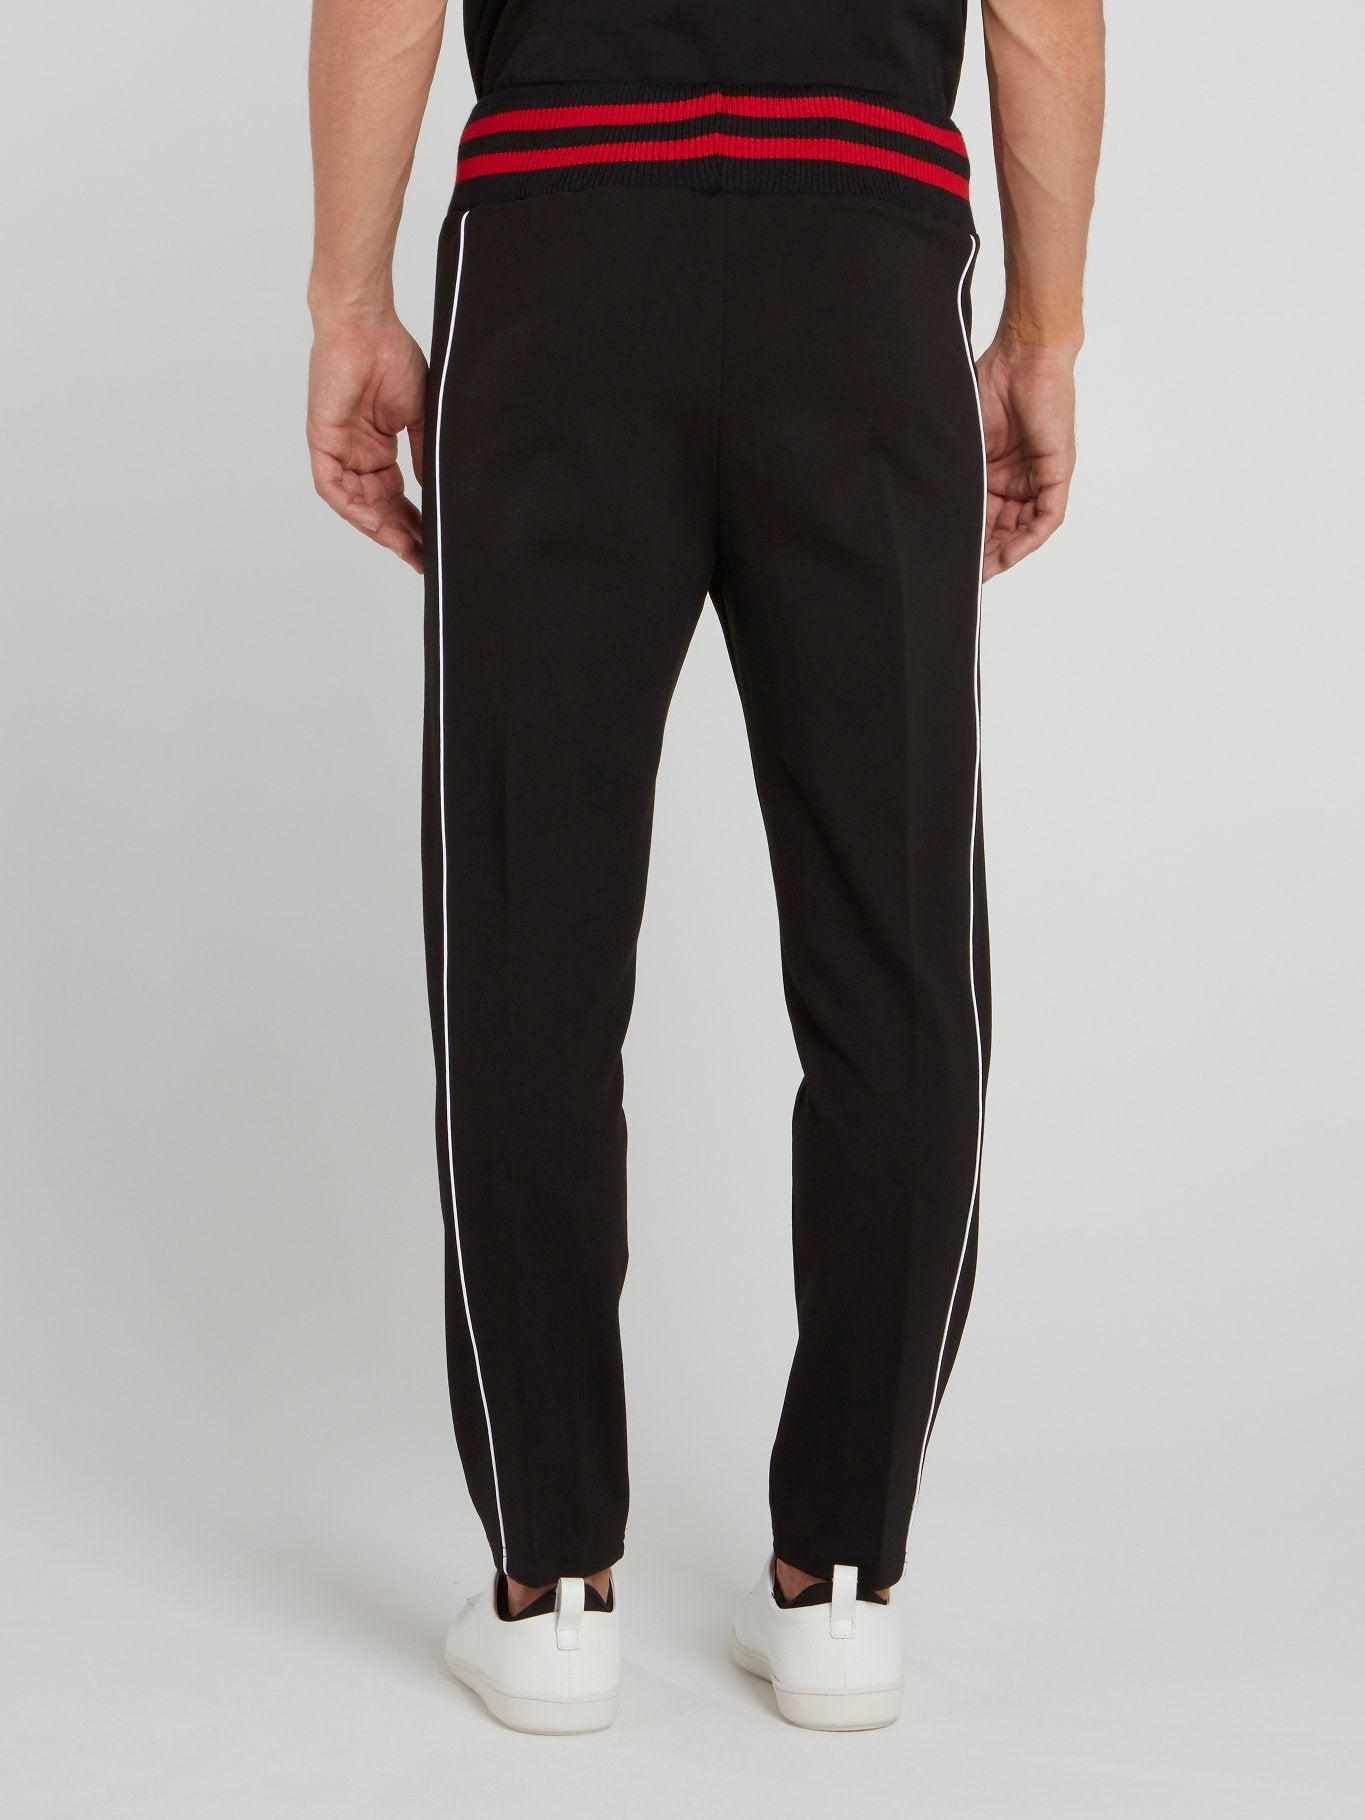 Black Striped Waistband Trousers